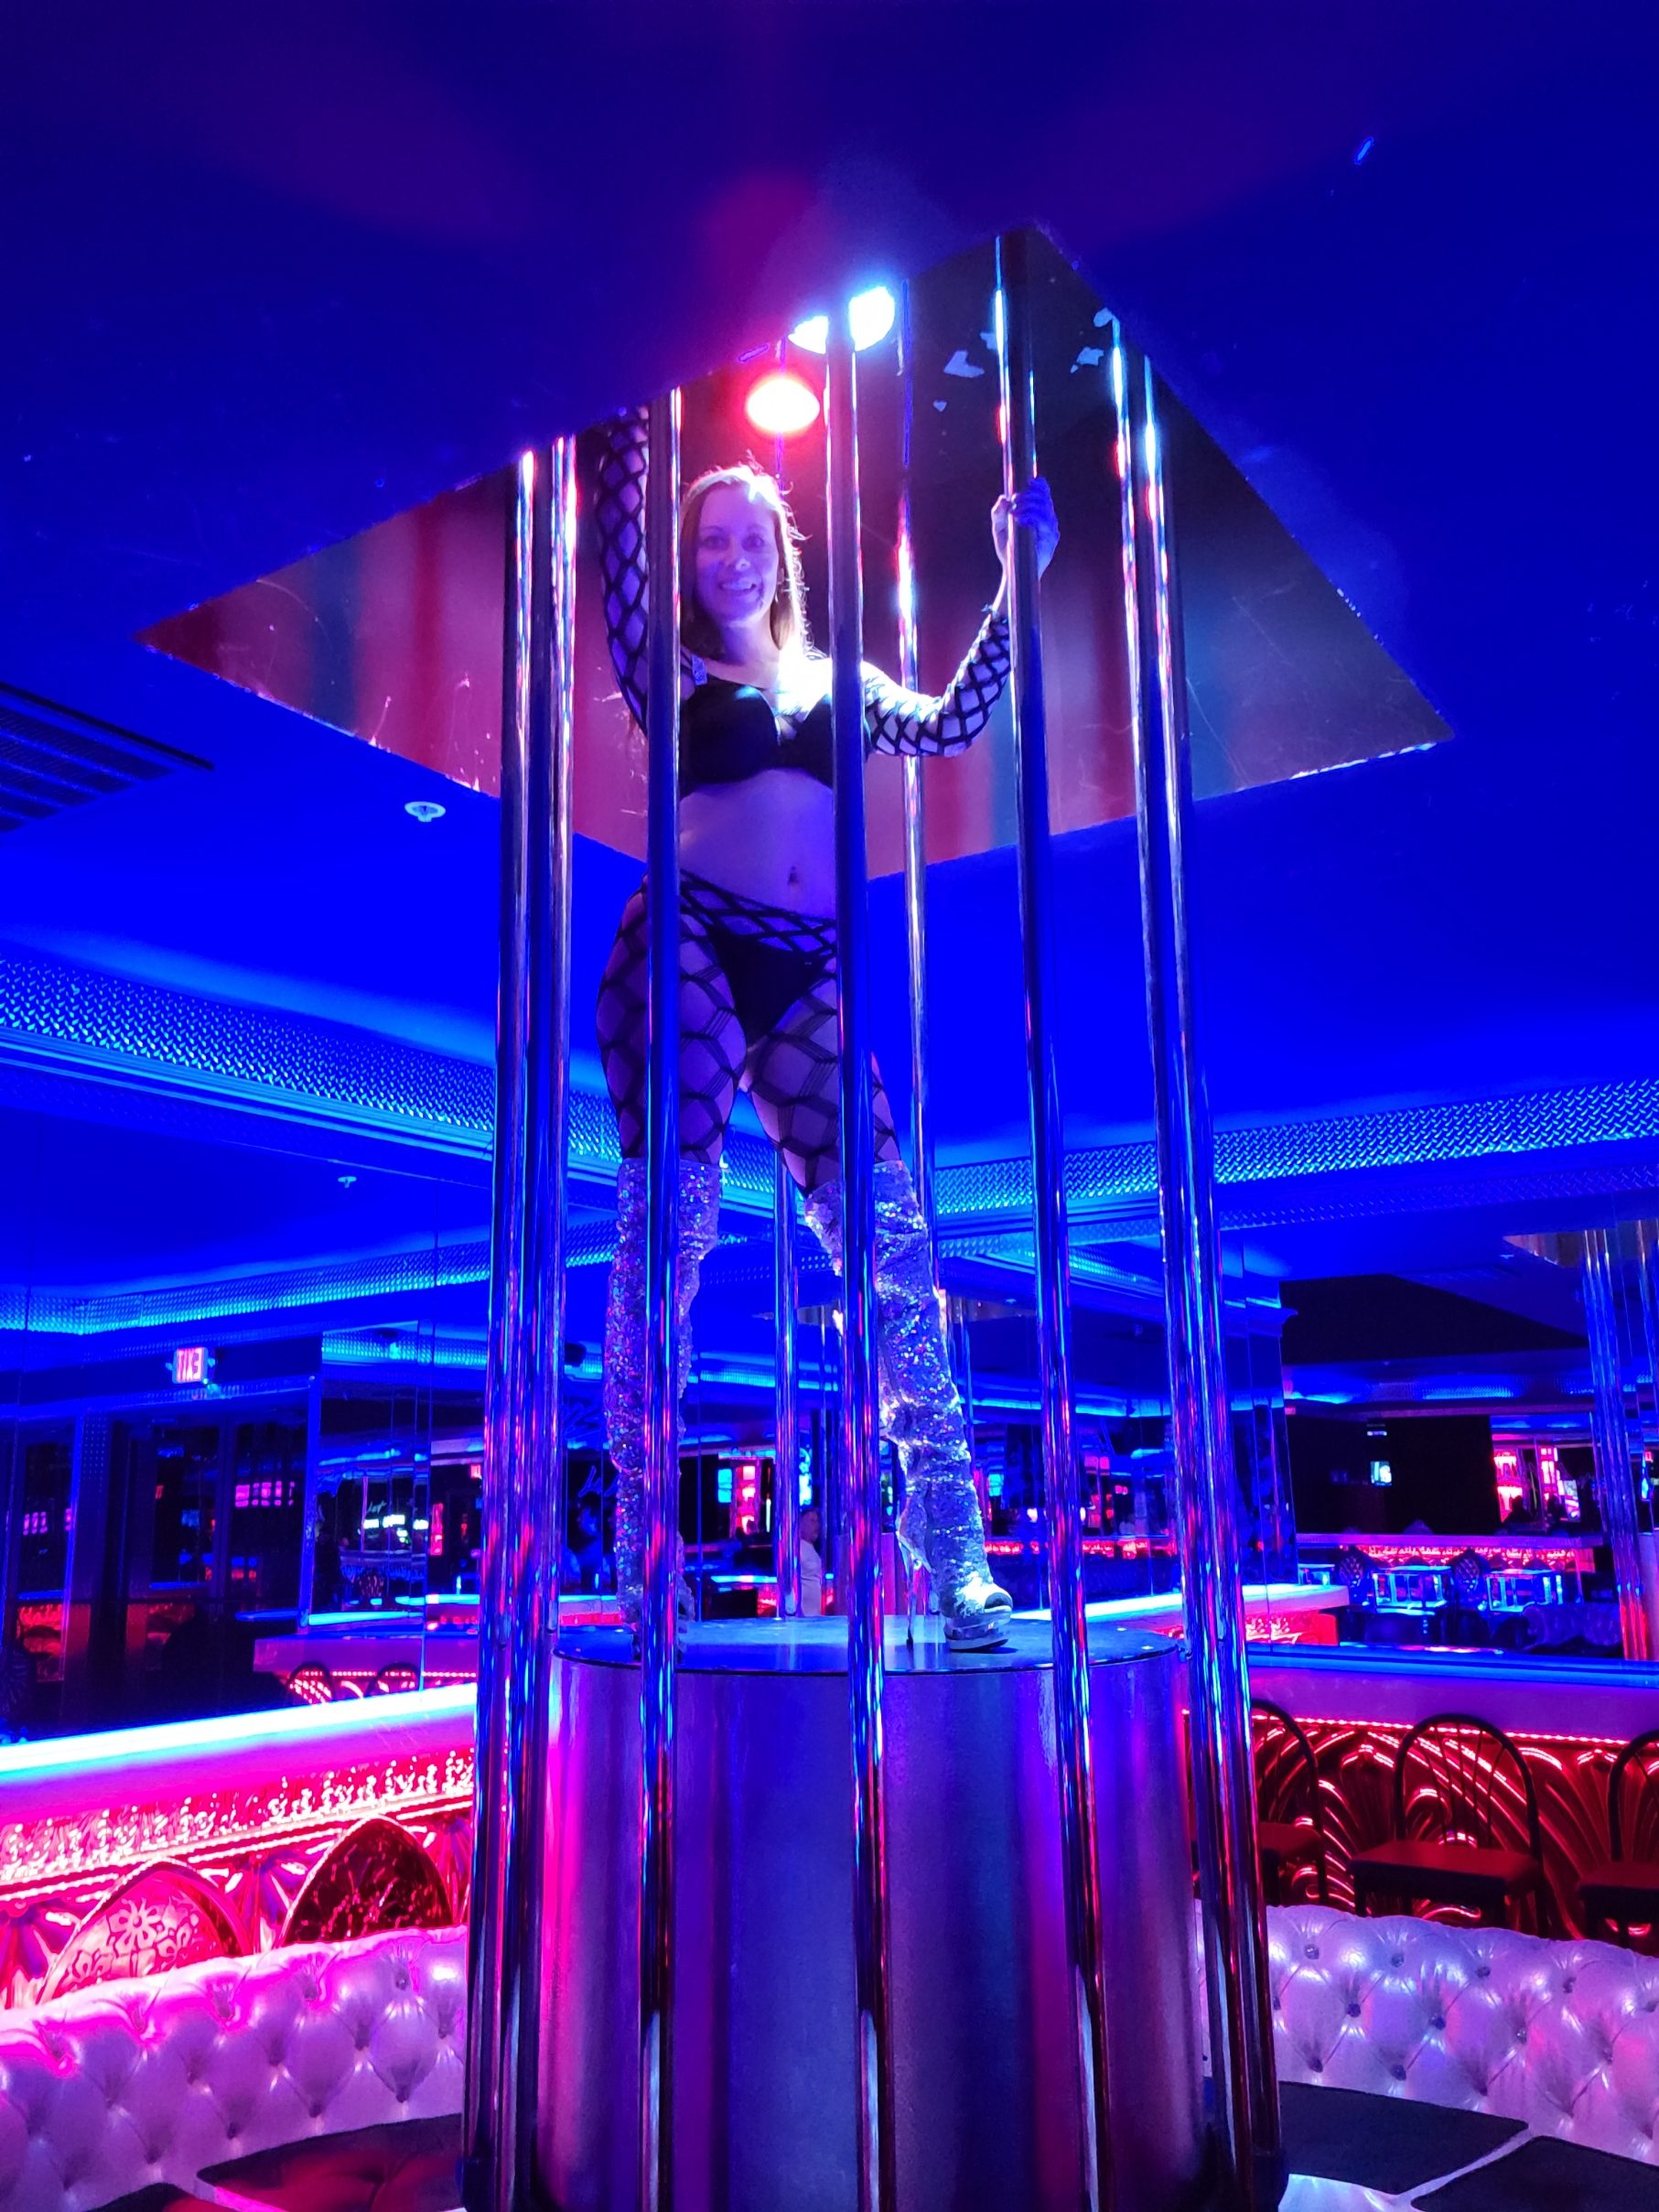 The 'World's Tallest Stripper Poles' just installed ... in West Virginia?!